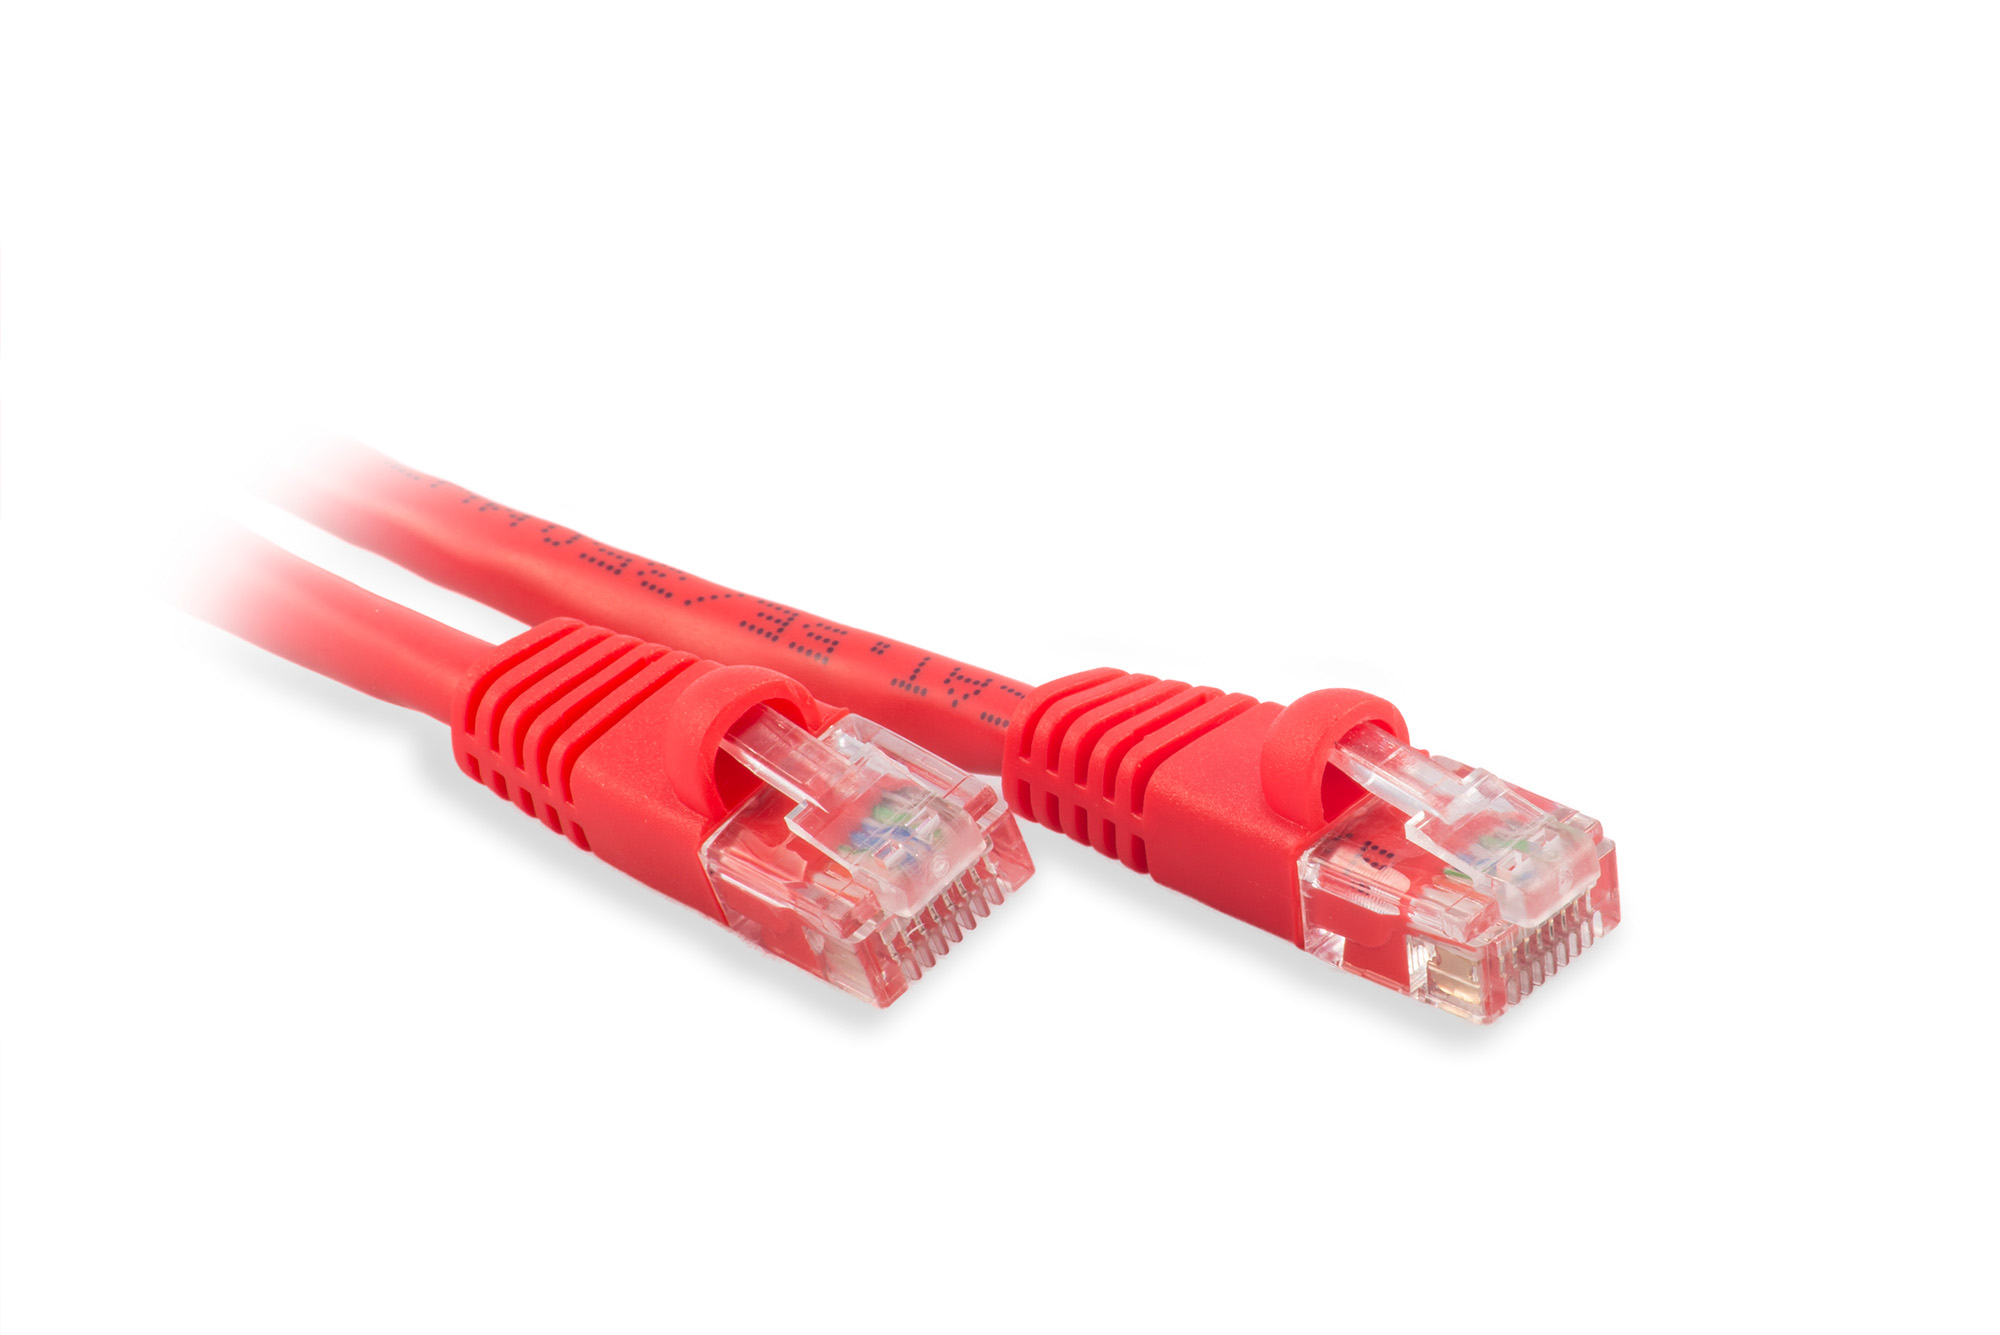 100ft Cat5e Ethernet Patch Cable - Red Color - Snagless Boot, Stranded, RJ45, 350Mhz, 24AWG